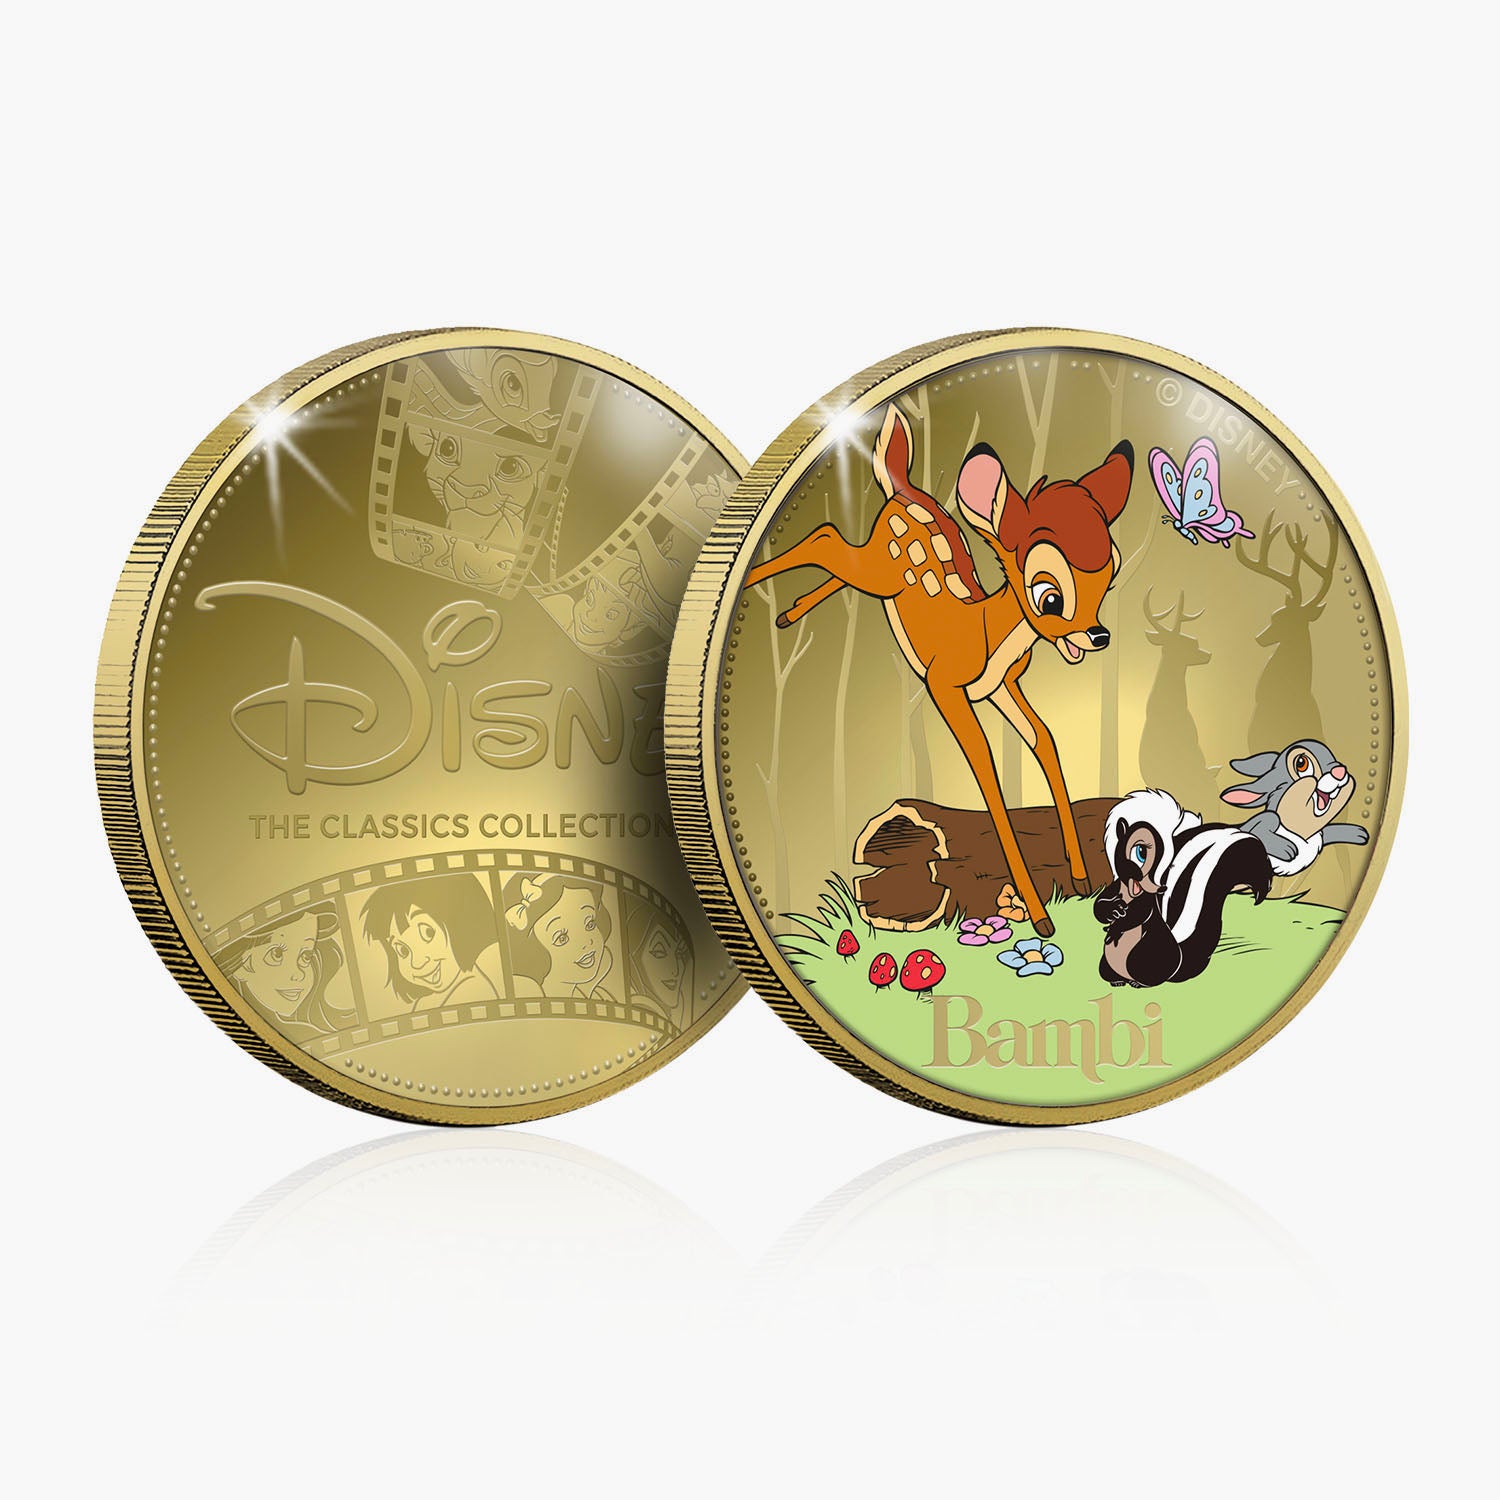 Bambi Gold-Plated Commemorative